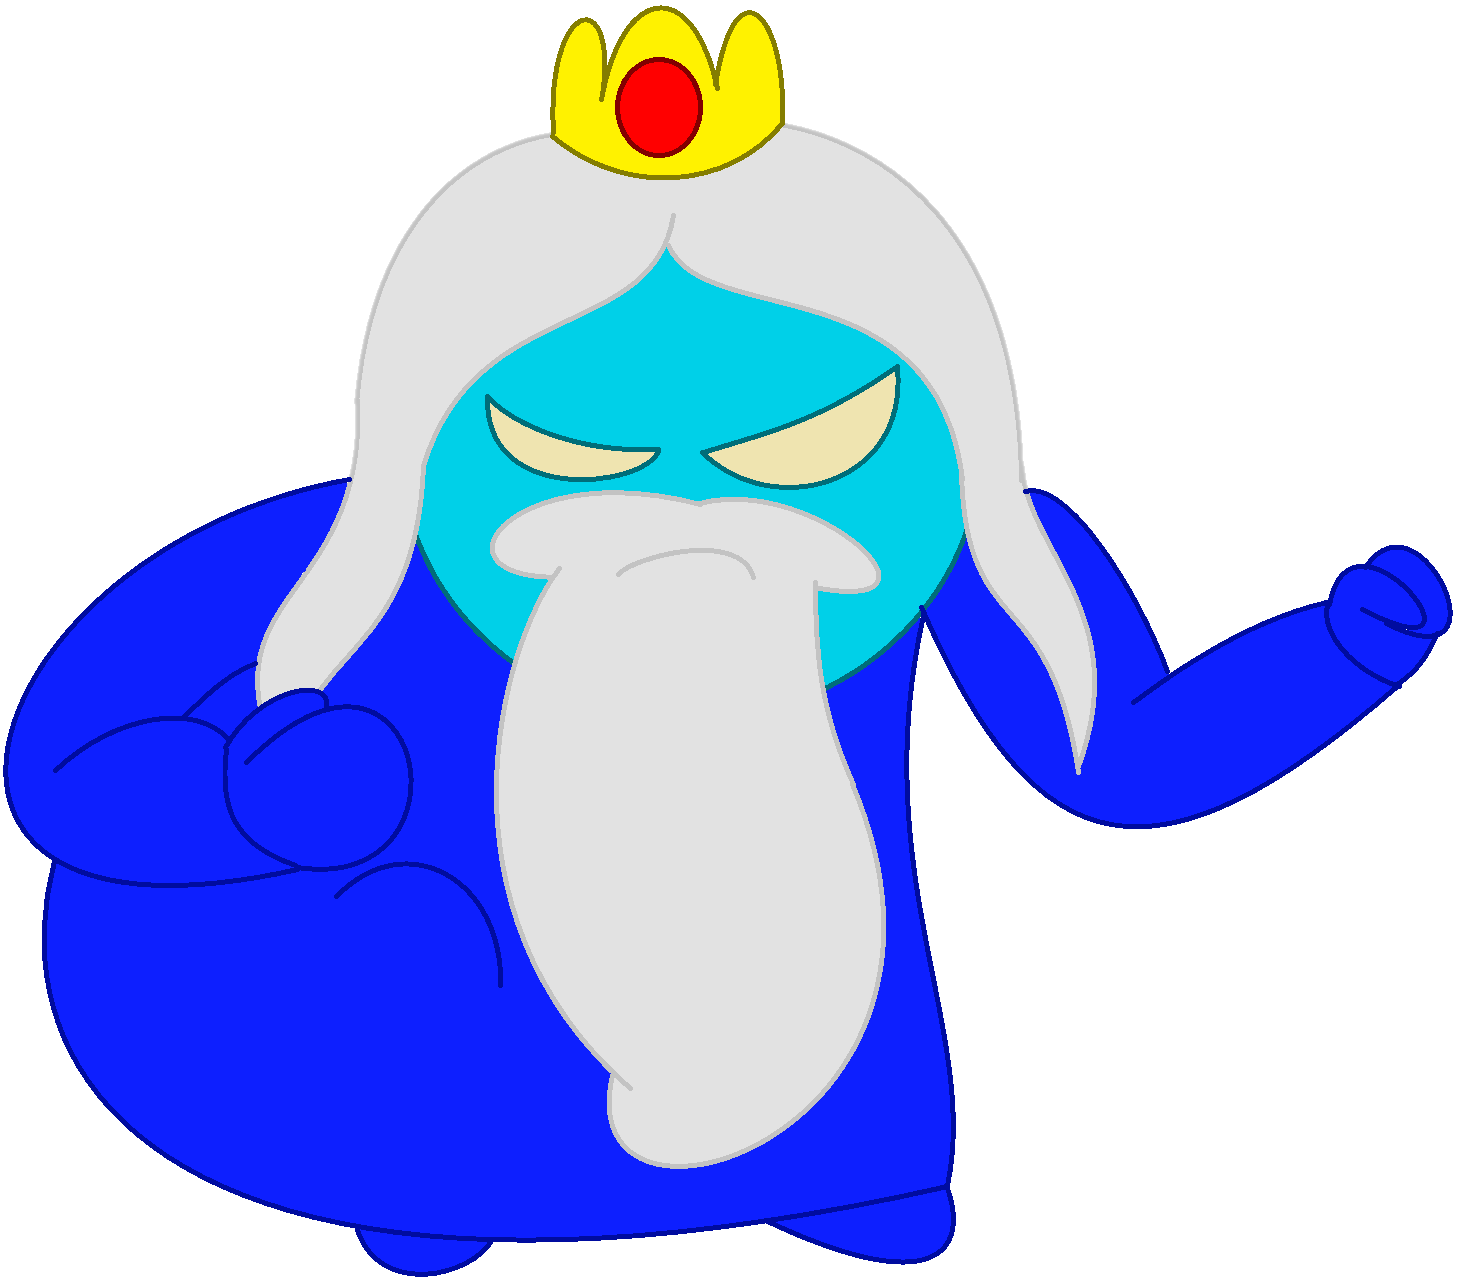 The Ice King Png by theMatowig1 on DeviantArt